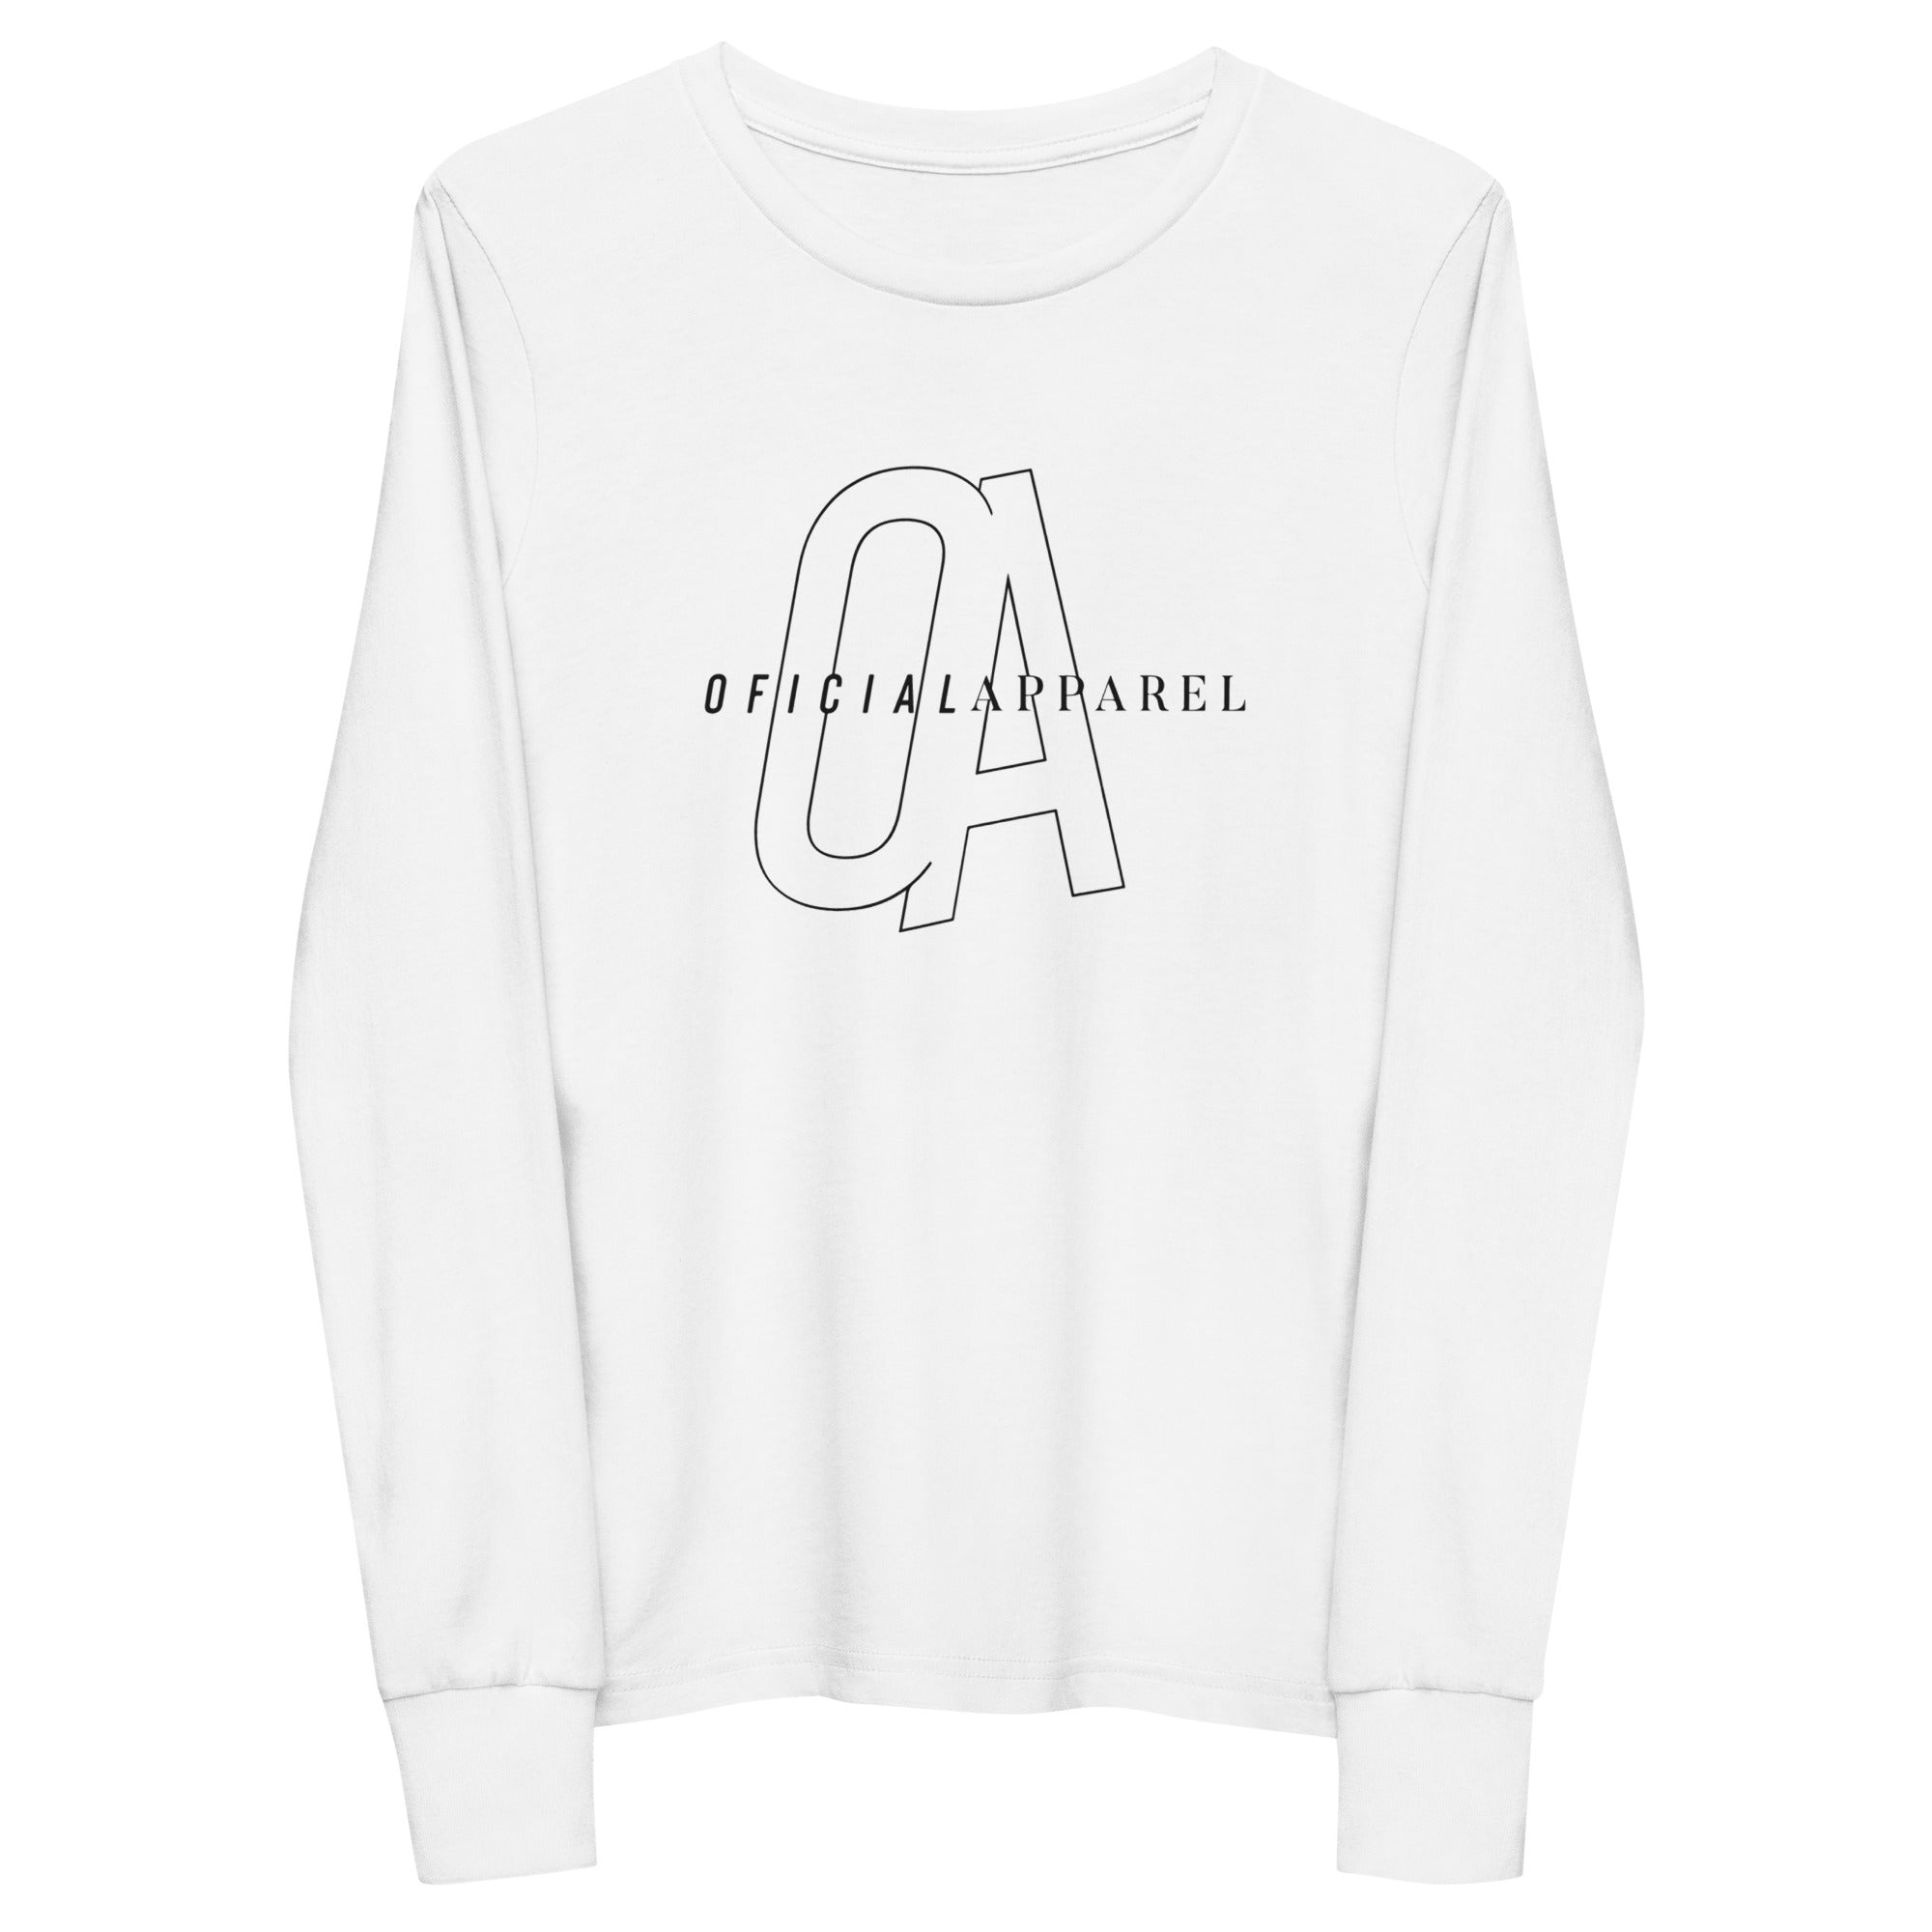 OFICIAL Youth long sleeve tee